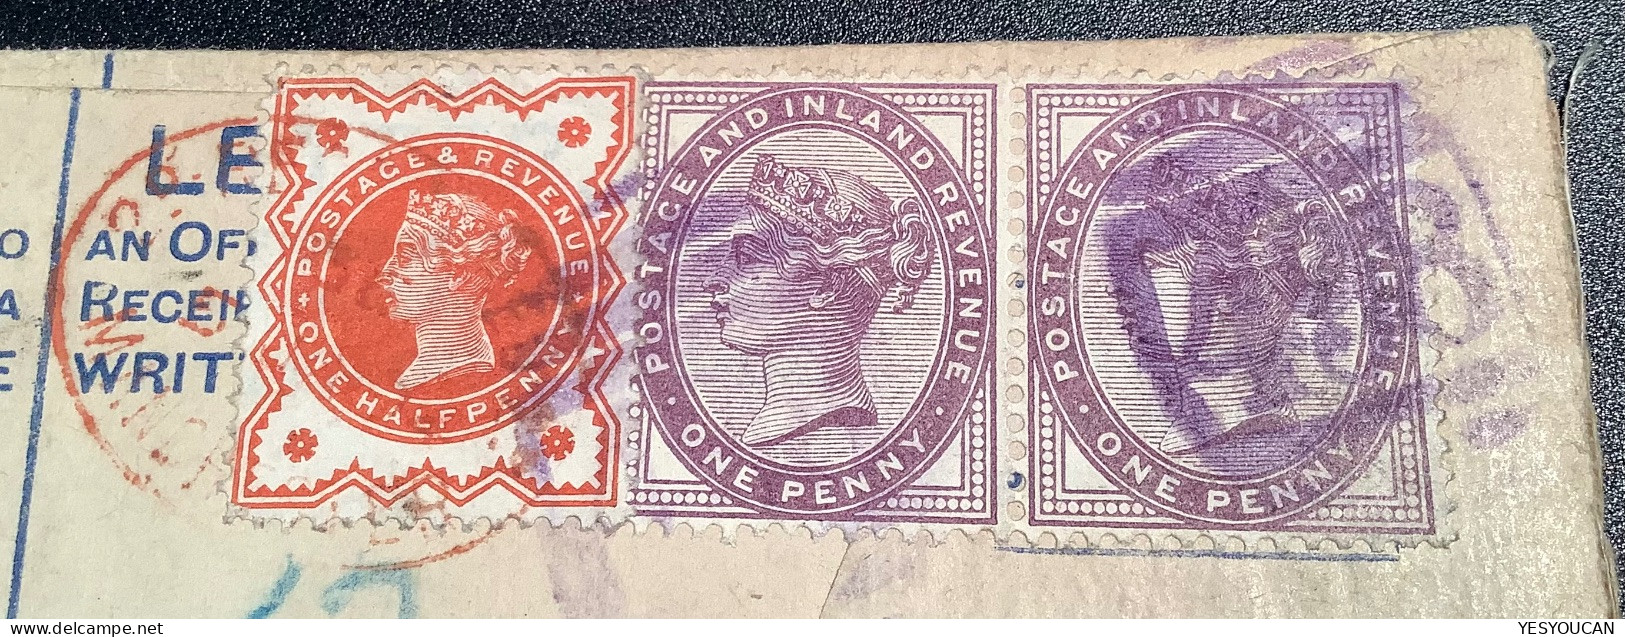 MANCHESTER VIOLET ! PMK 1894>BERLIN Cover ! GB Queen Victoria Jubilee+penny Lilac Postal Stationery Registered Letter - Covers & Documents